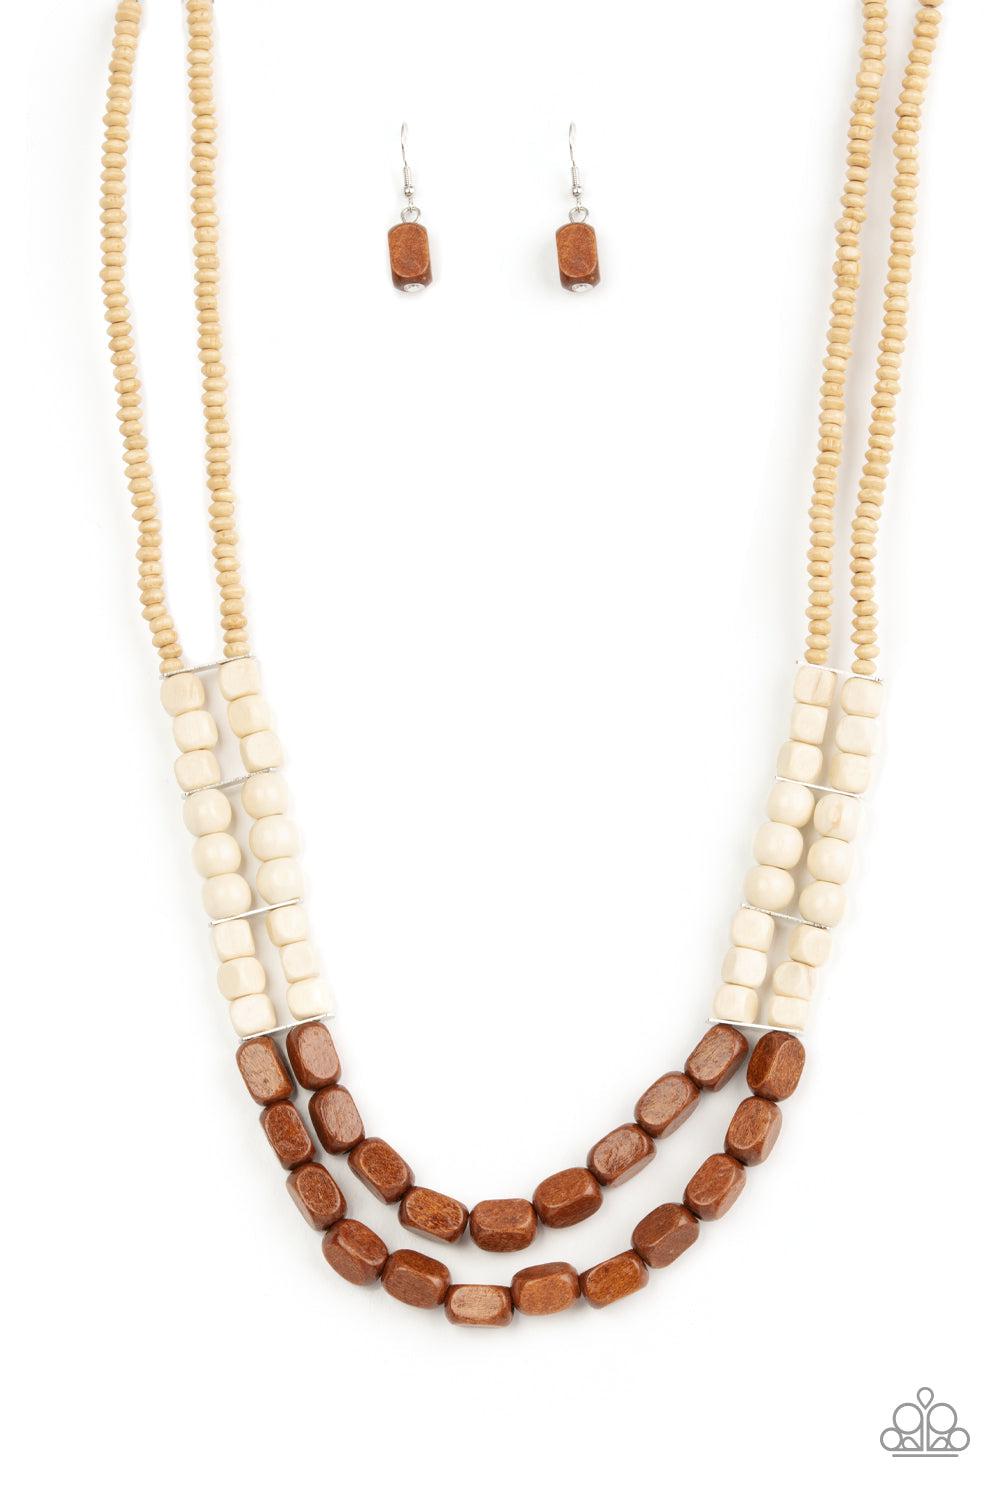 Bermuda Bellhop Brown &amp; White Wood Necklace - Paparazzi Accessories- lightbox - CarasShop.com - $5 Jewelry by Cara Jewels